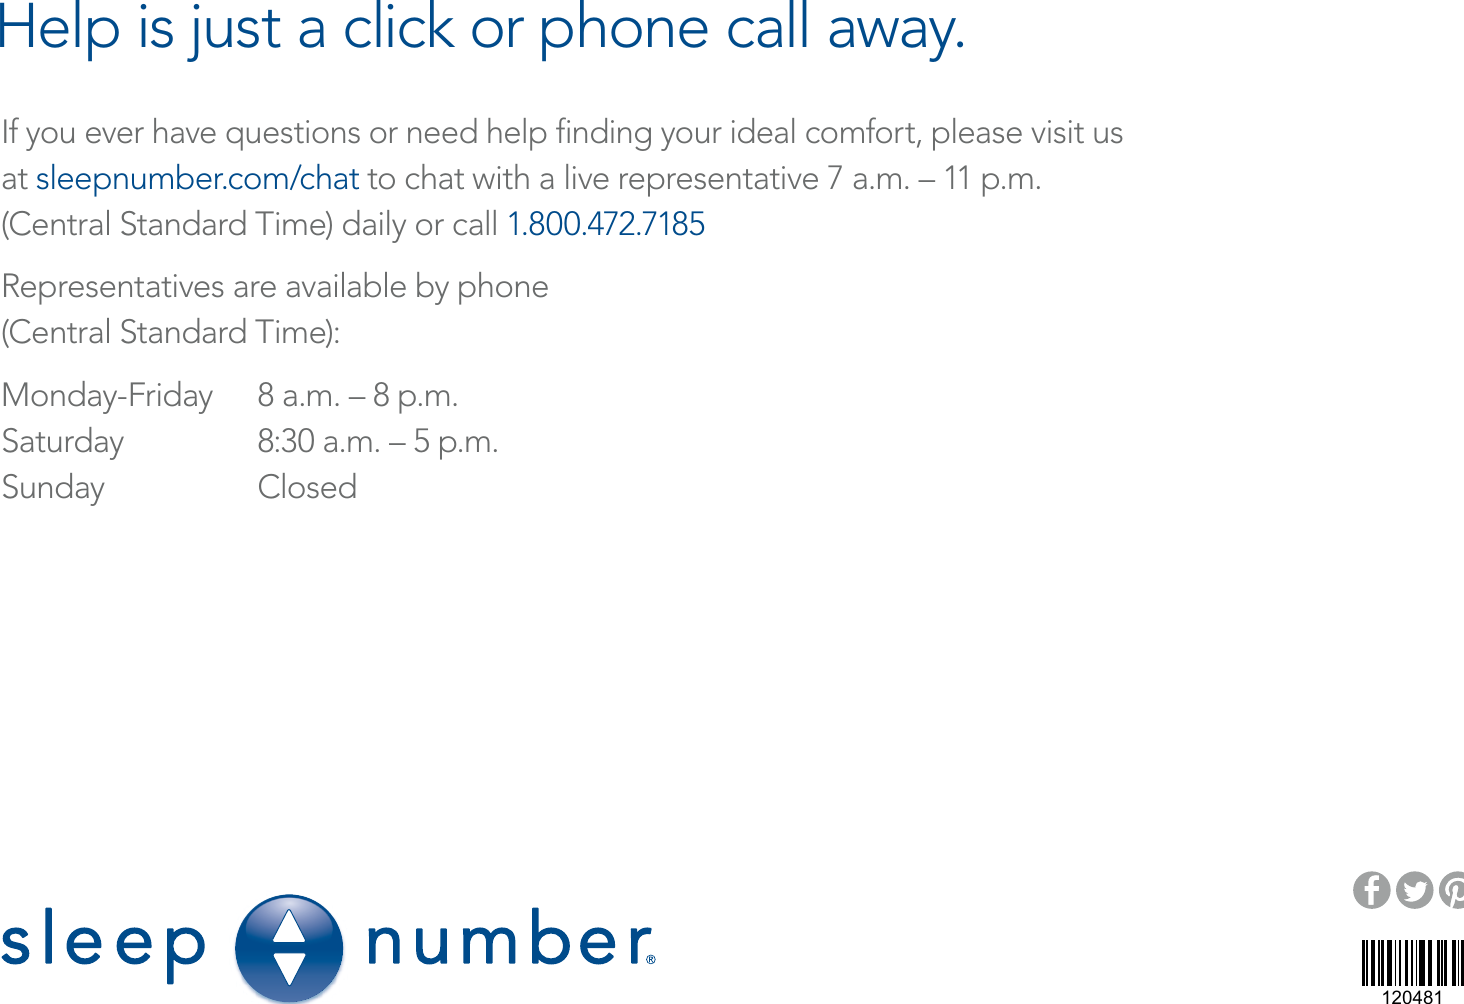 If you ever have questions or need help ﬁnding your ideal comfort, please visit us  at sleepnumber.com/chat to chat with a live representative 7 a.m. – 11 p.m.  (Central Standard Time) daily or call 1.800.472.7185Representatives are available by phone(Central Standard Time):Monday-Friday  8 a.m. – 8 p.m.Saturday  8:30 a.m. – 5 p.m.Sunday ClosedHelp is just a click or phone call away.9800 59th Avenue North, Minneapolis, MN  55442120481©2016 Select Comfort Corporation    1/16   207338